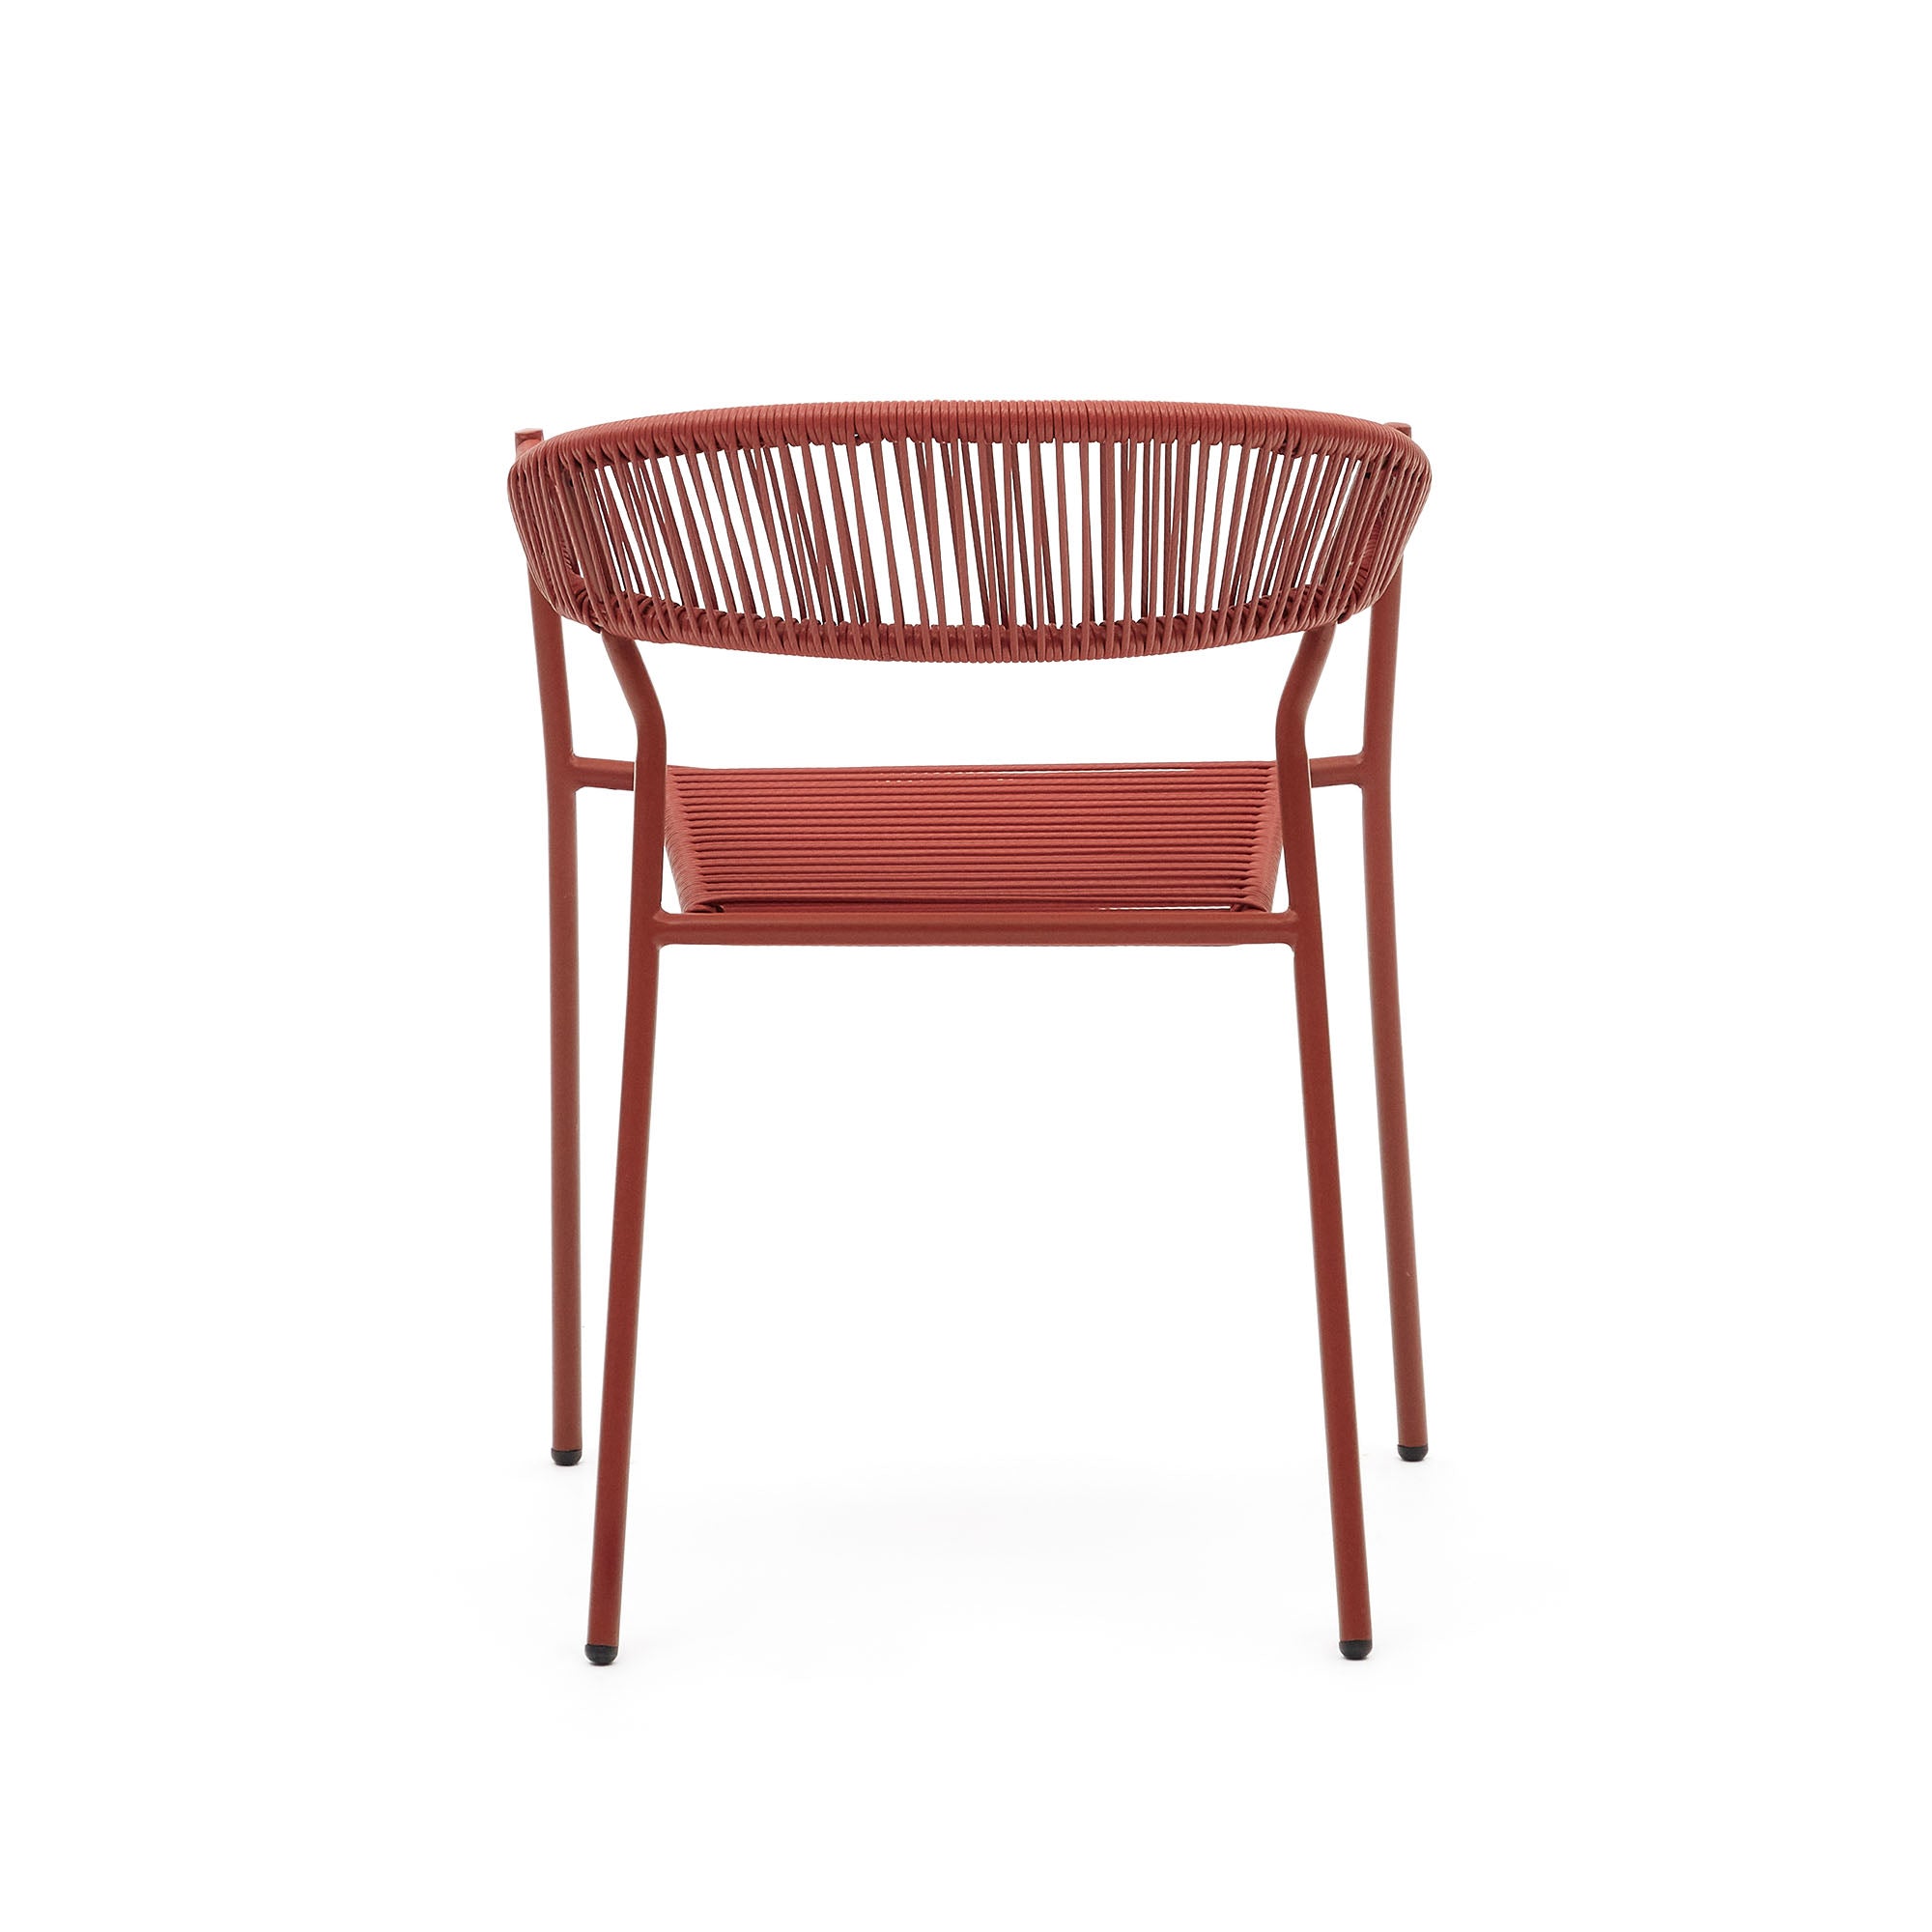 Futadera stackable outdoor chair in terracotta synthetic cord and terracotta painted steel